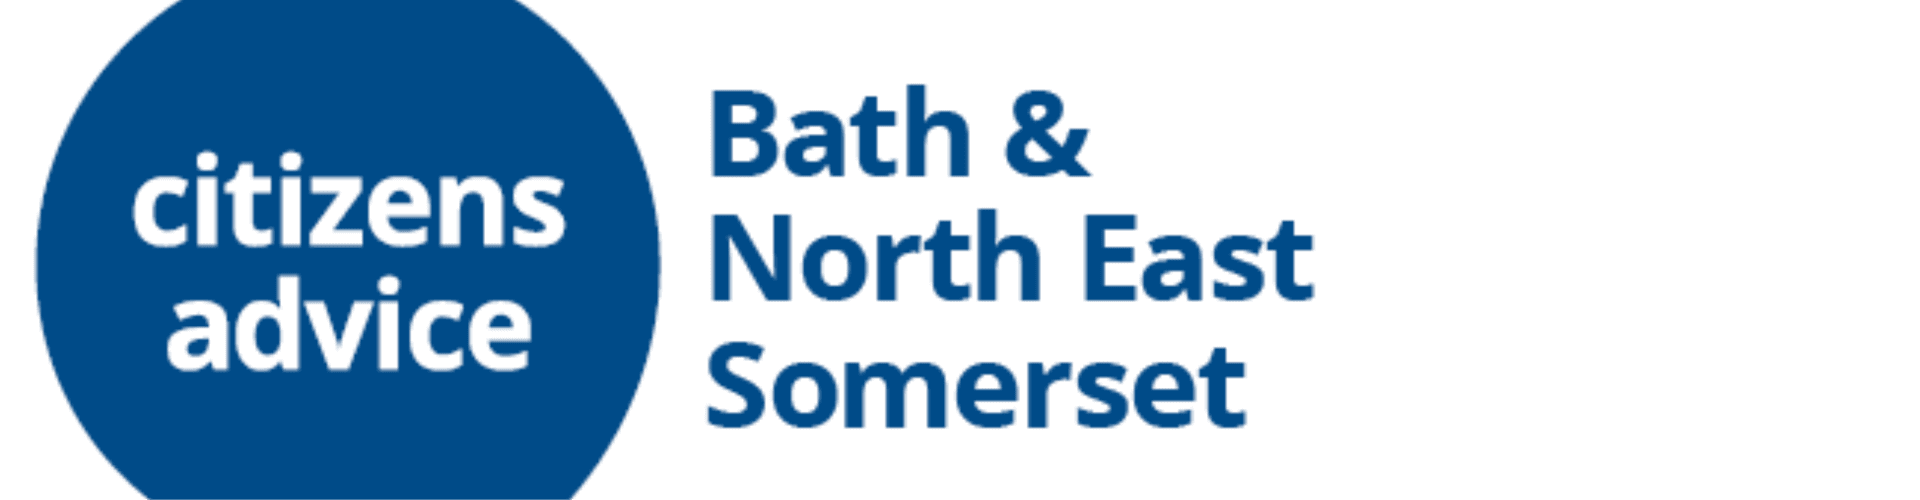 Citizens Advice Bath & North East Somerset cover